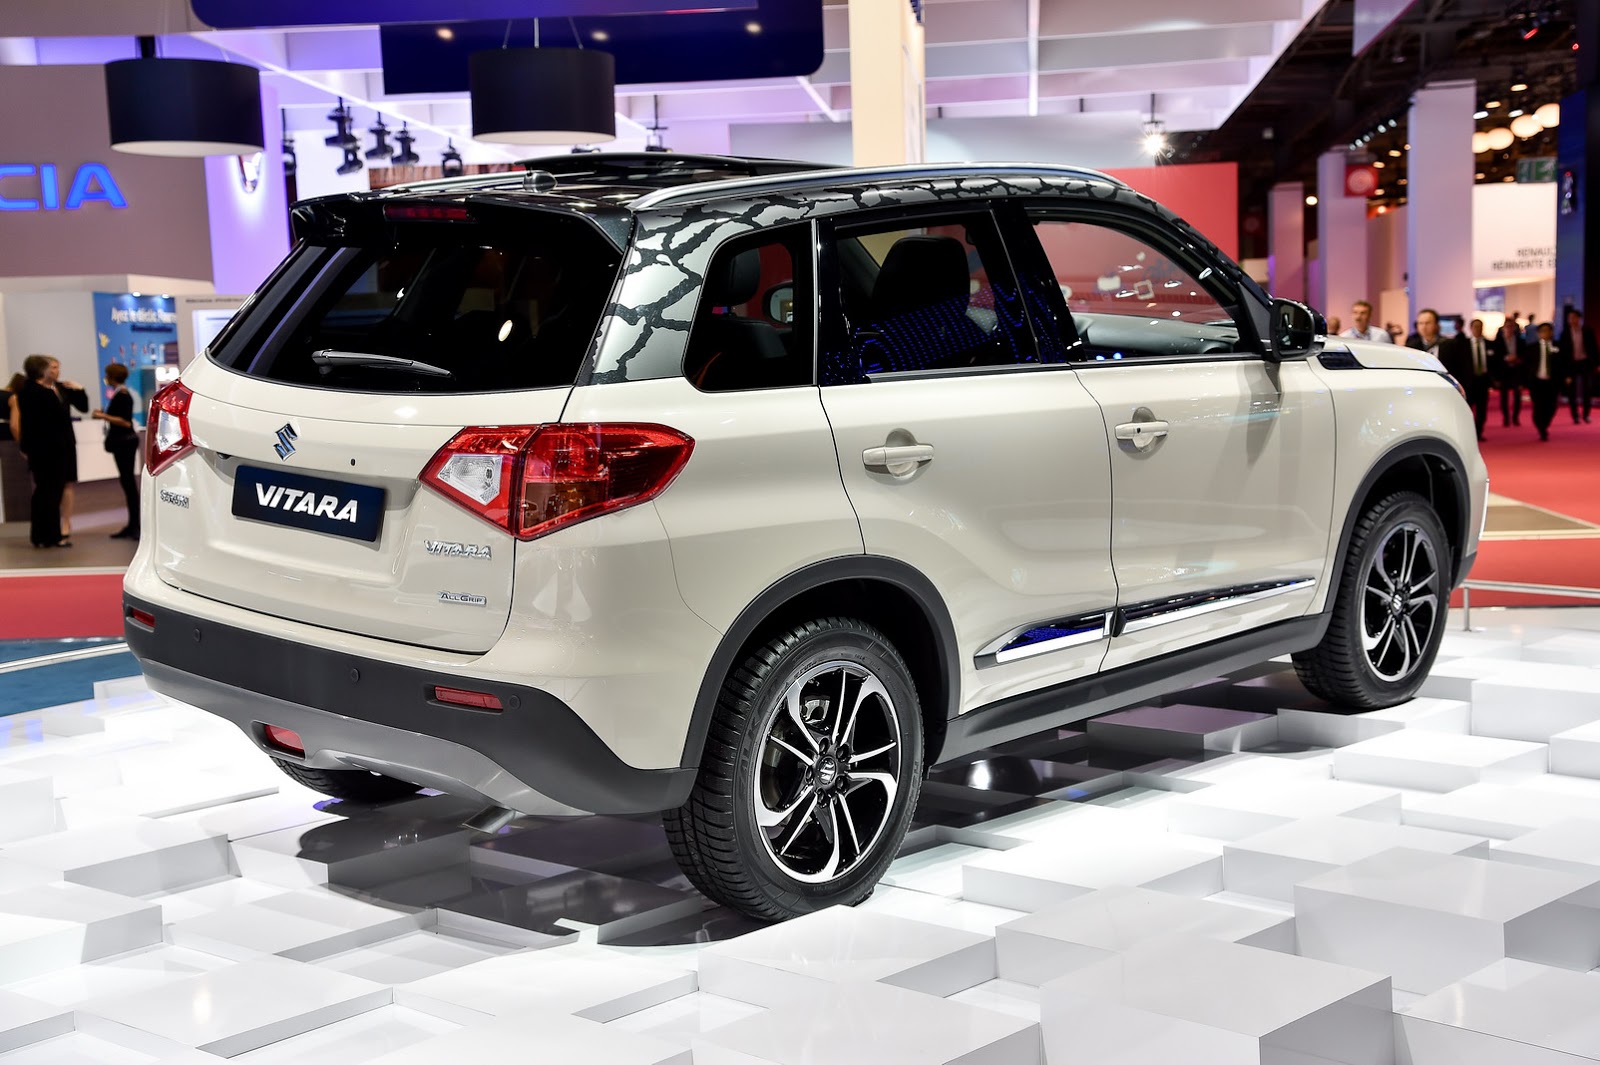 New Suzuki Vitara Compact SUV Could be Mistaken for a 